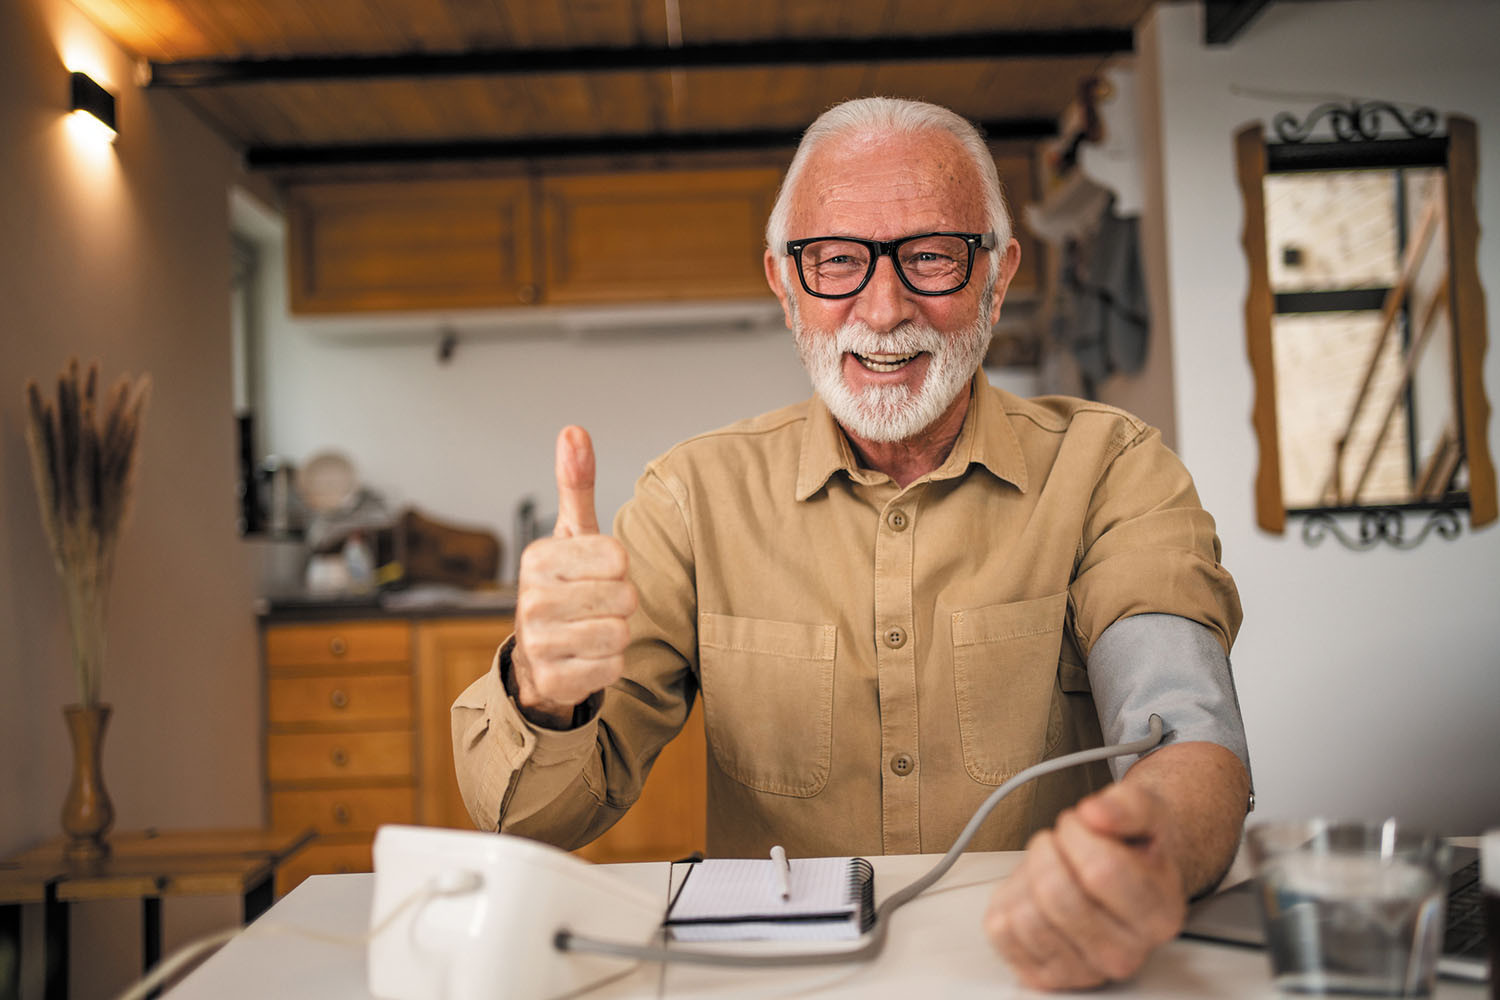 photo of a senior man smiling and making a thumbs-up gesture while taking his blood pressure at home